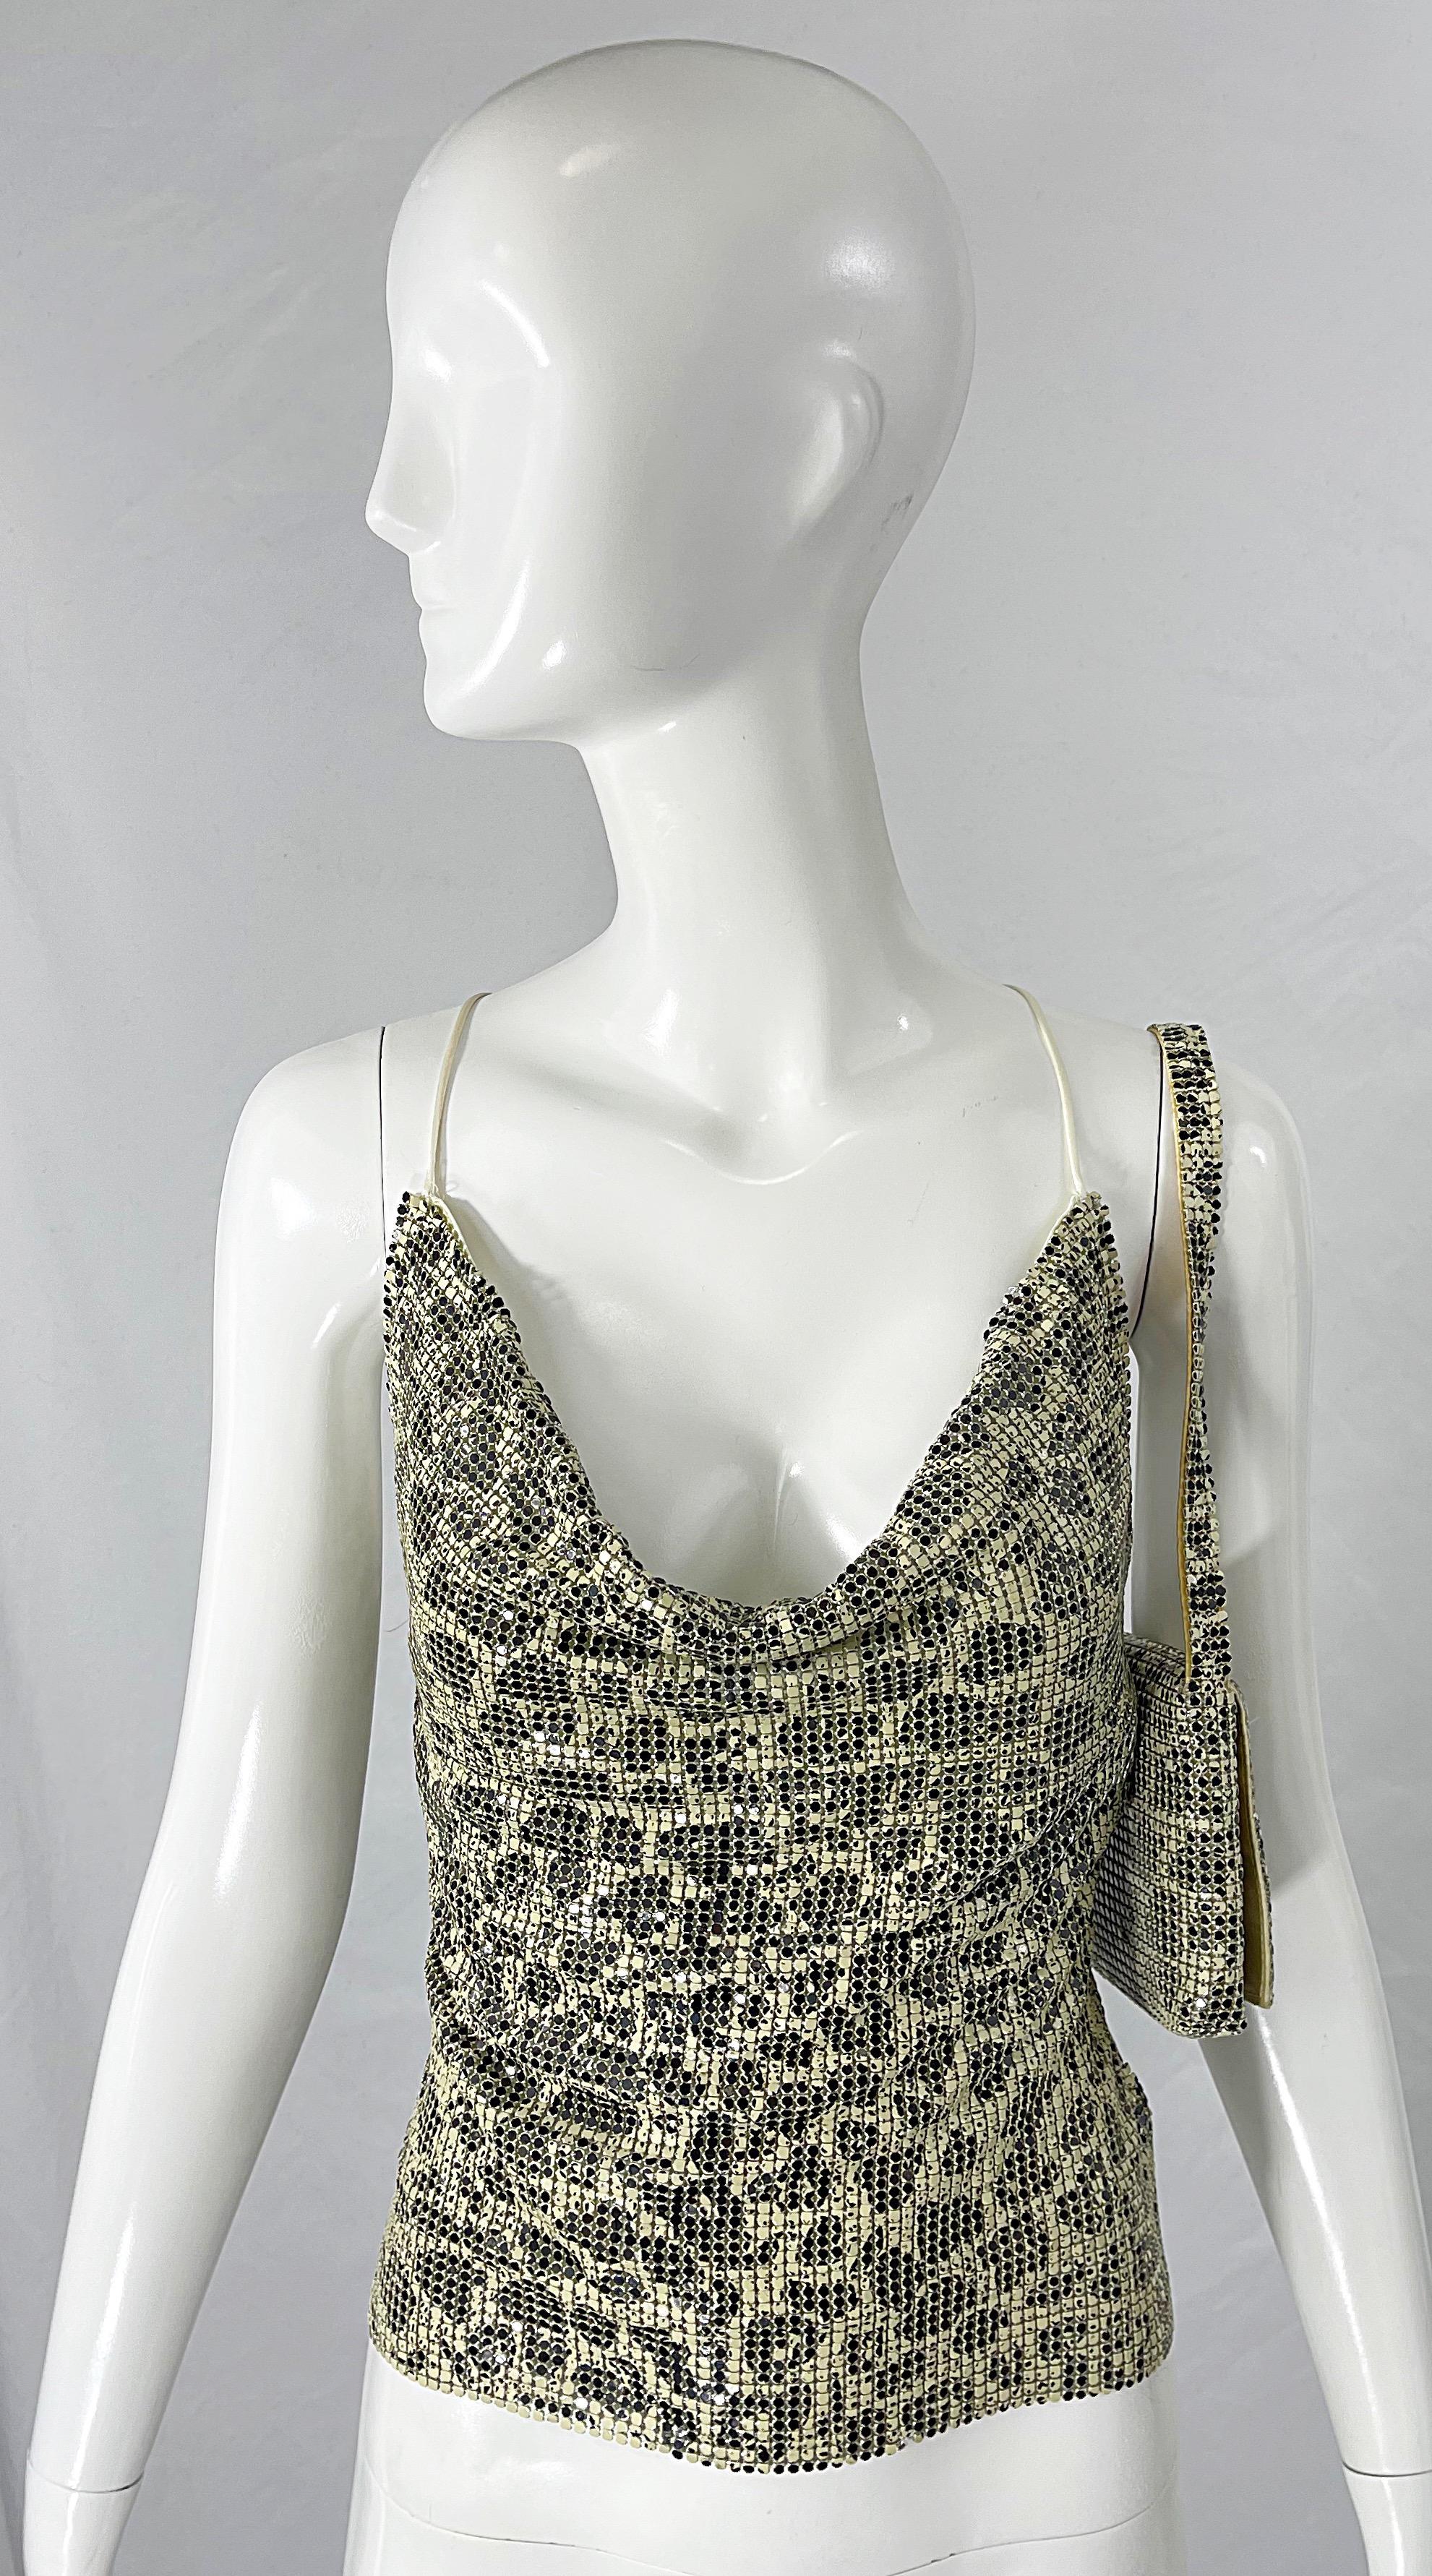 Sexy 90s does 70s vintage chainmail disco animal leopard print halter top and bag set ! Features a chic black and ivory cheetah print throghout. The thing I particularly love about this top is that it is lined in a silky ivory fabric, so it is not